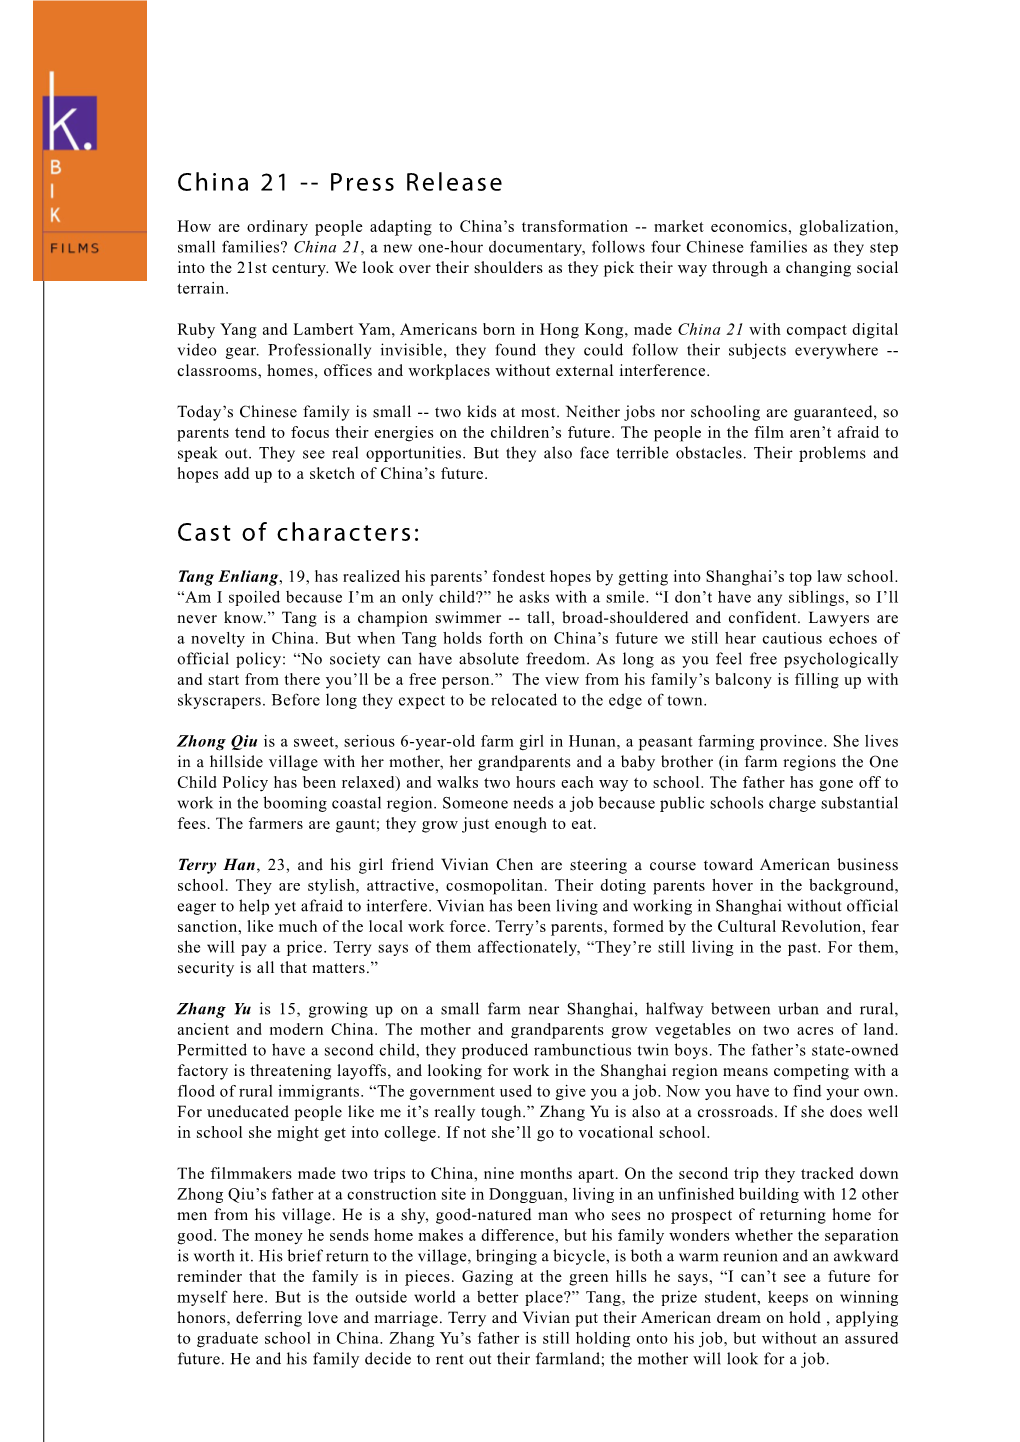 China 21 -- Press Release Cast of Characters